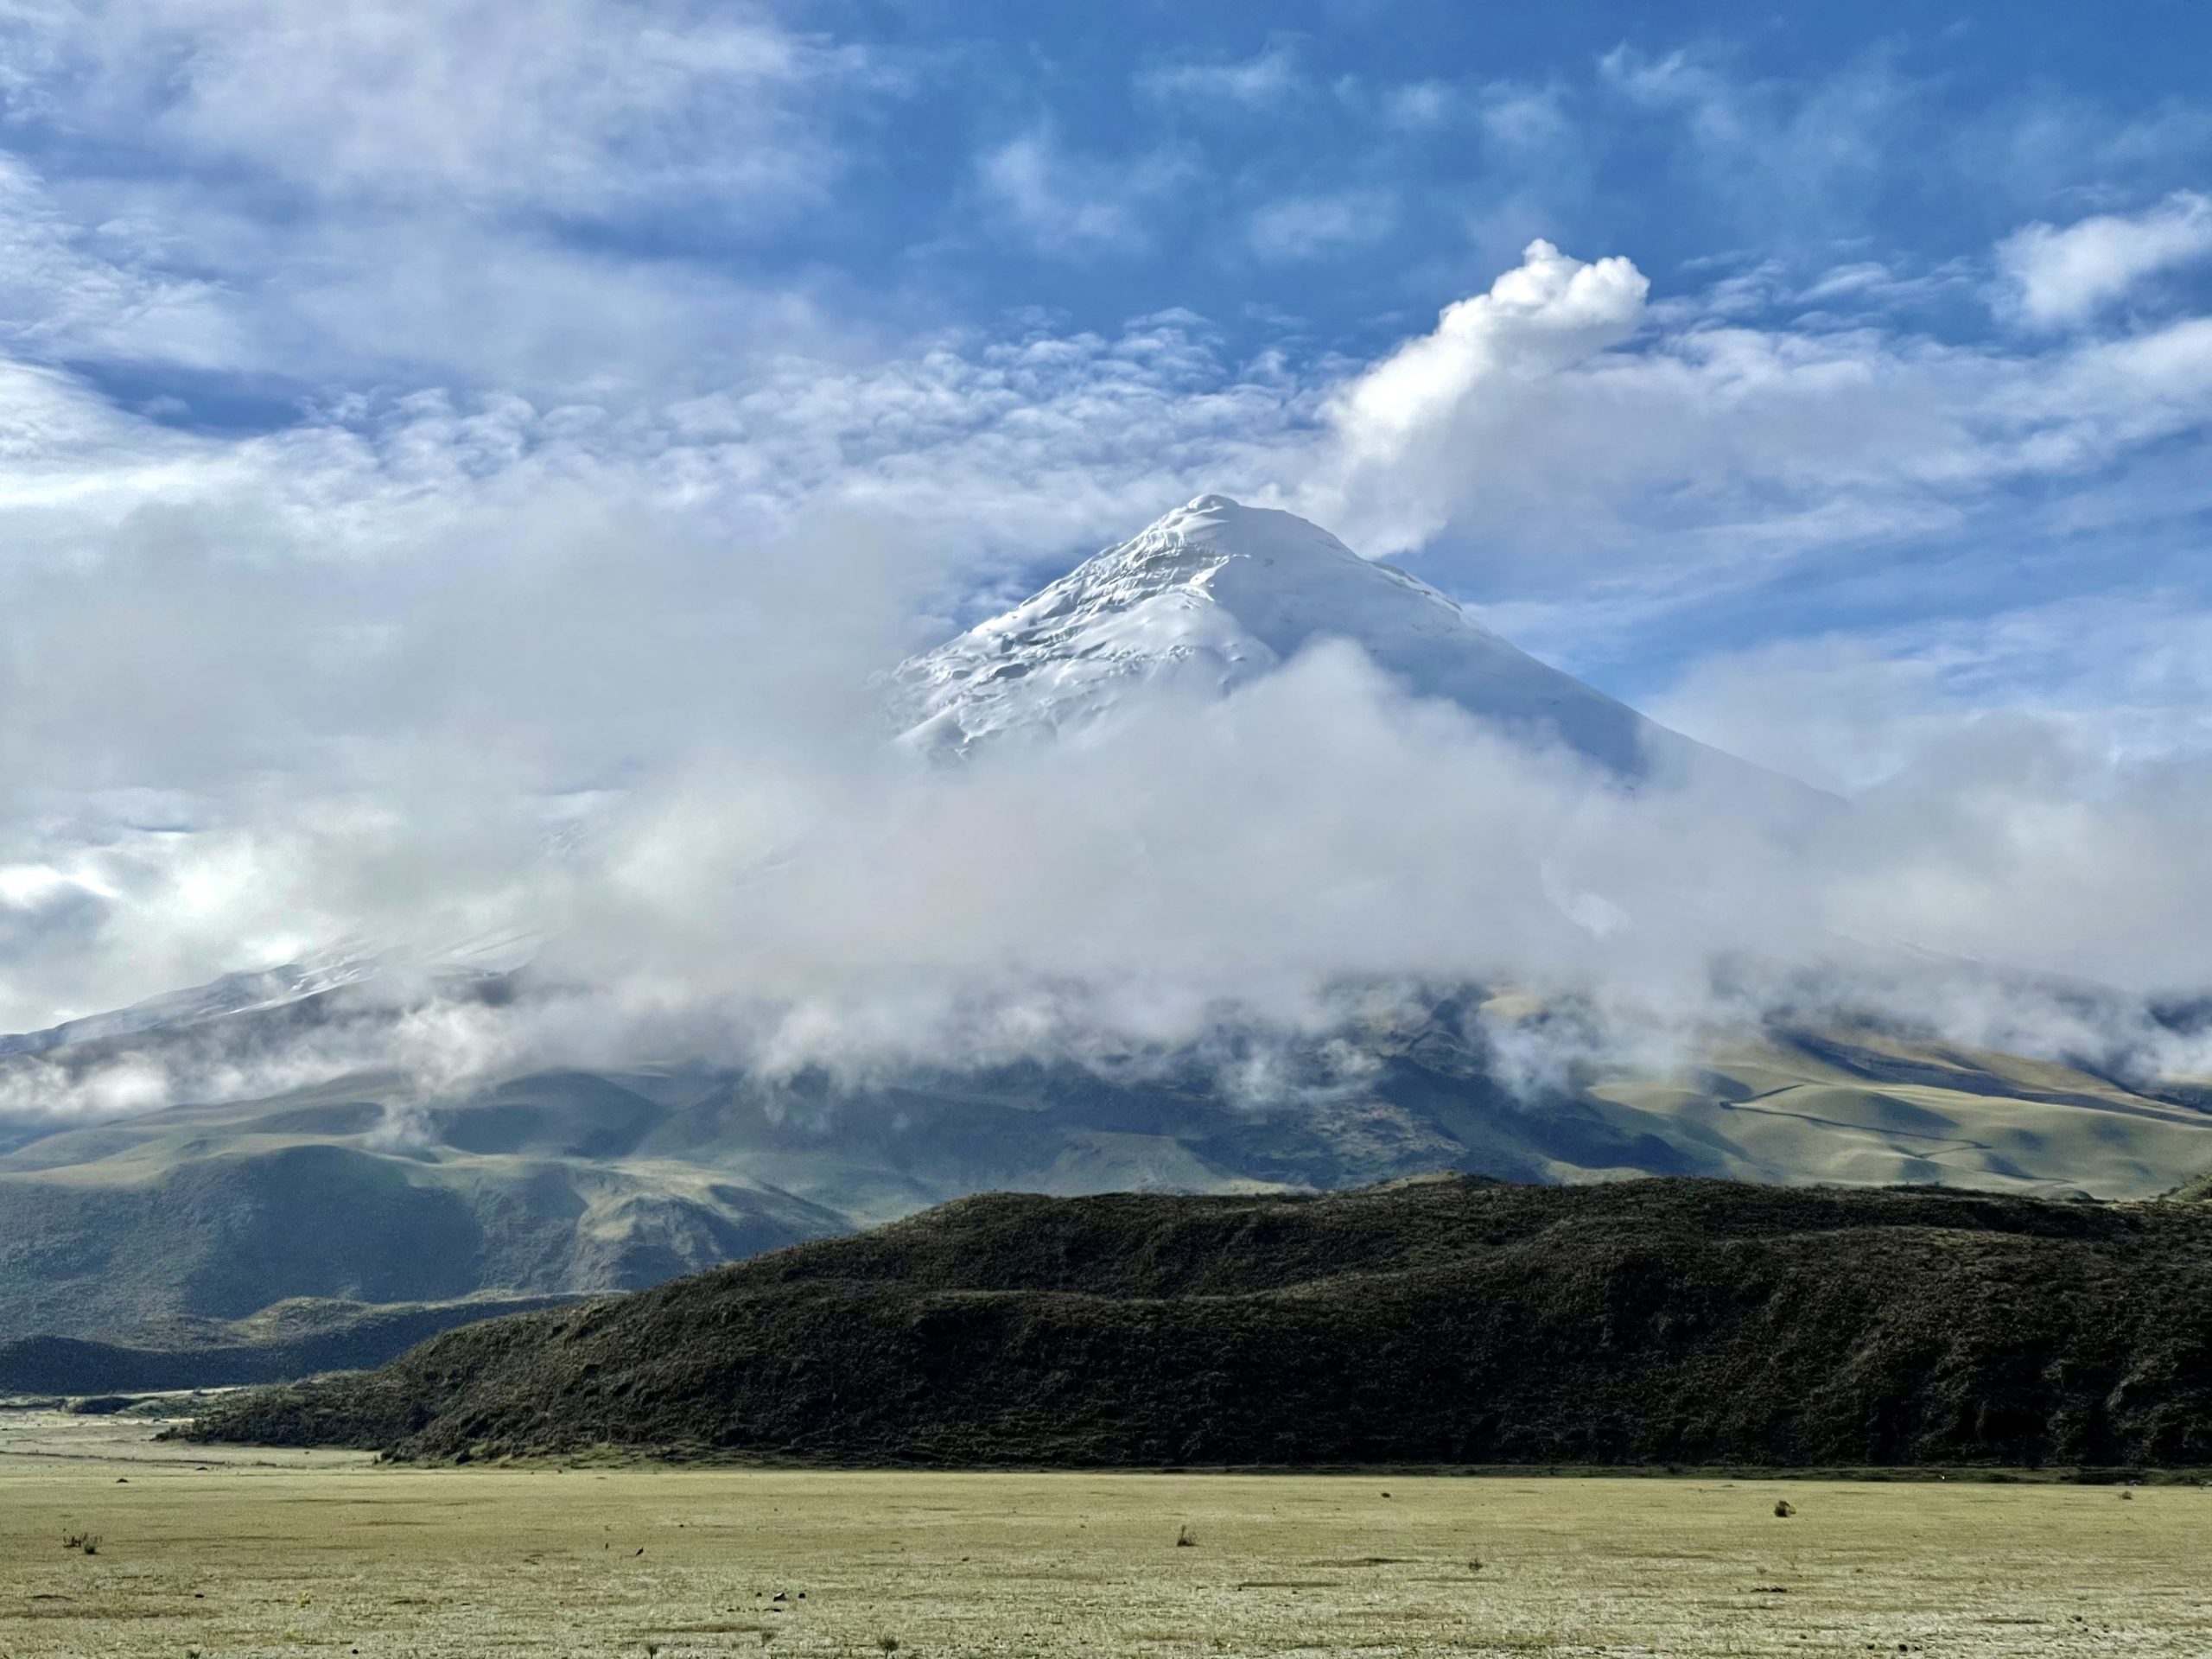 Tall mountain peak standing tall through clouds in the Andes, snowy and serene